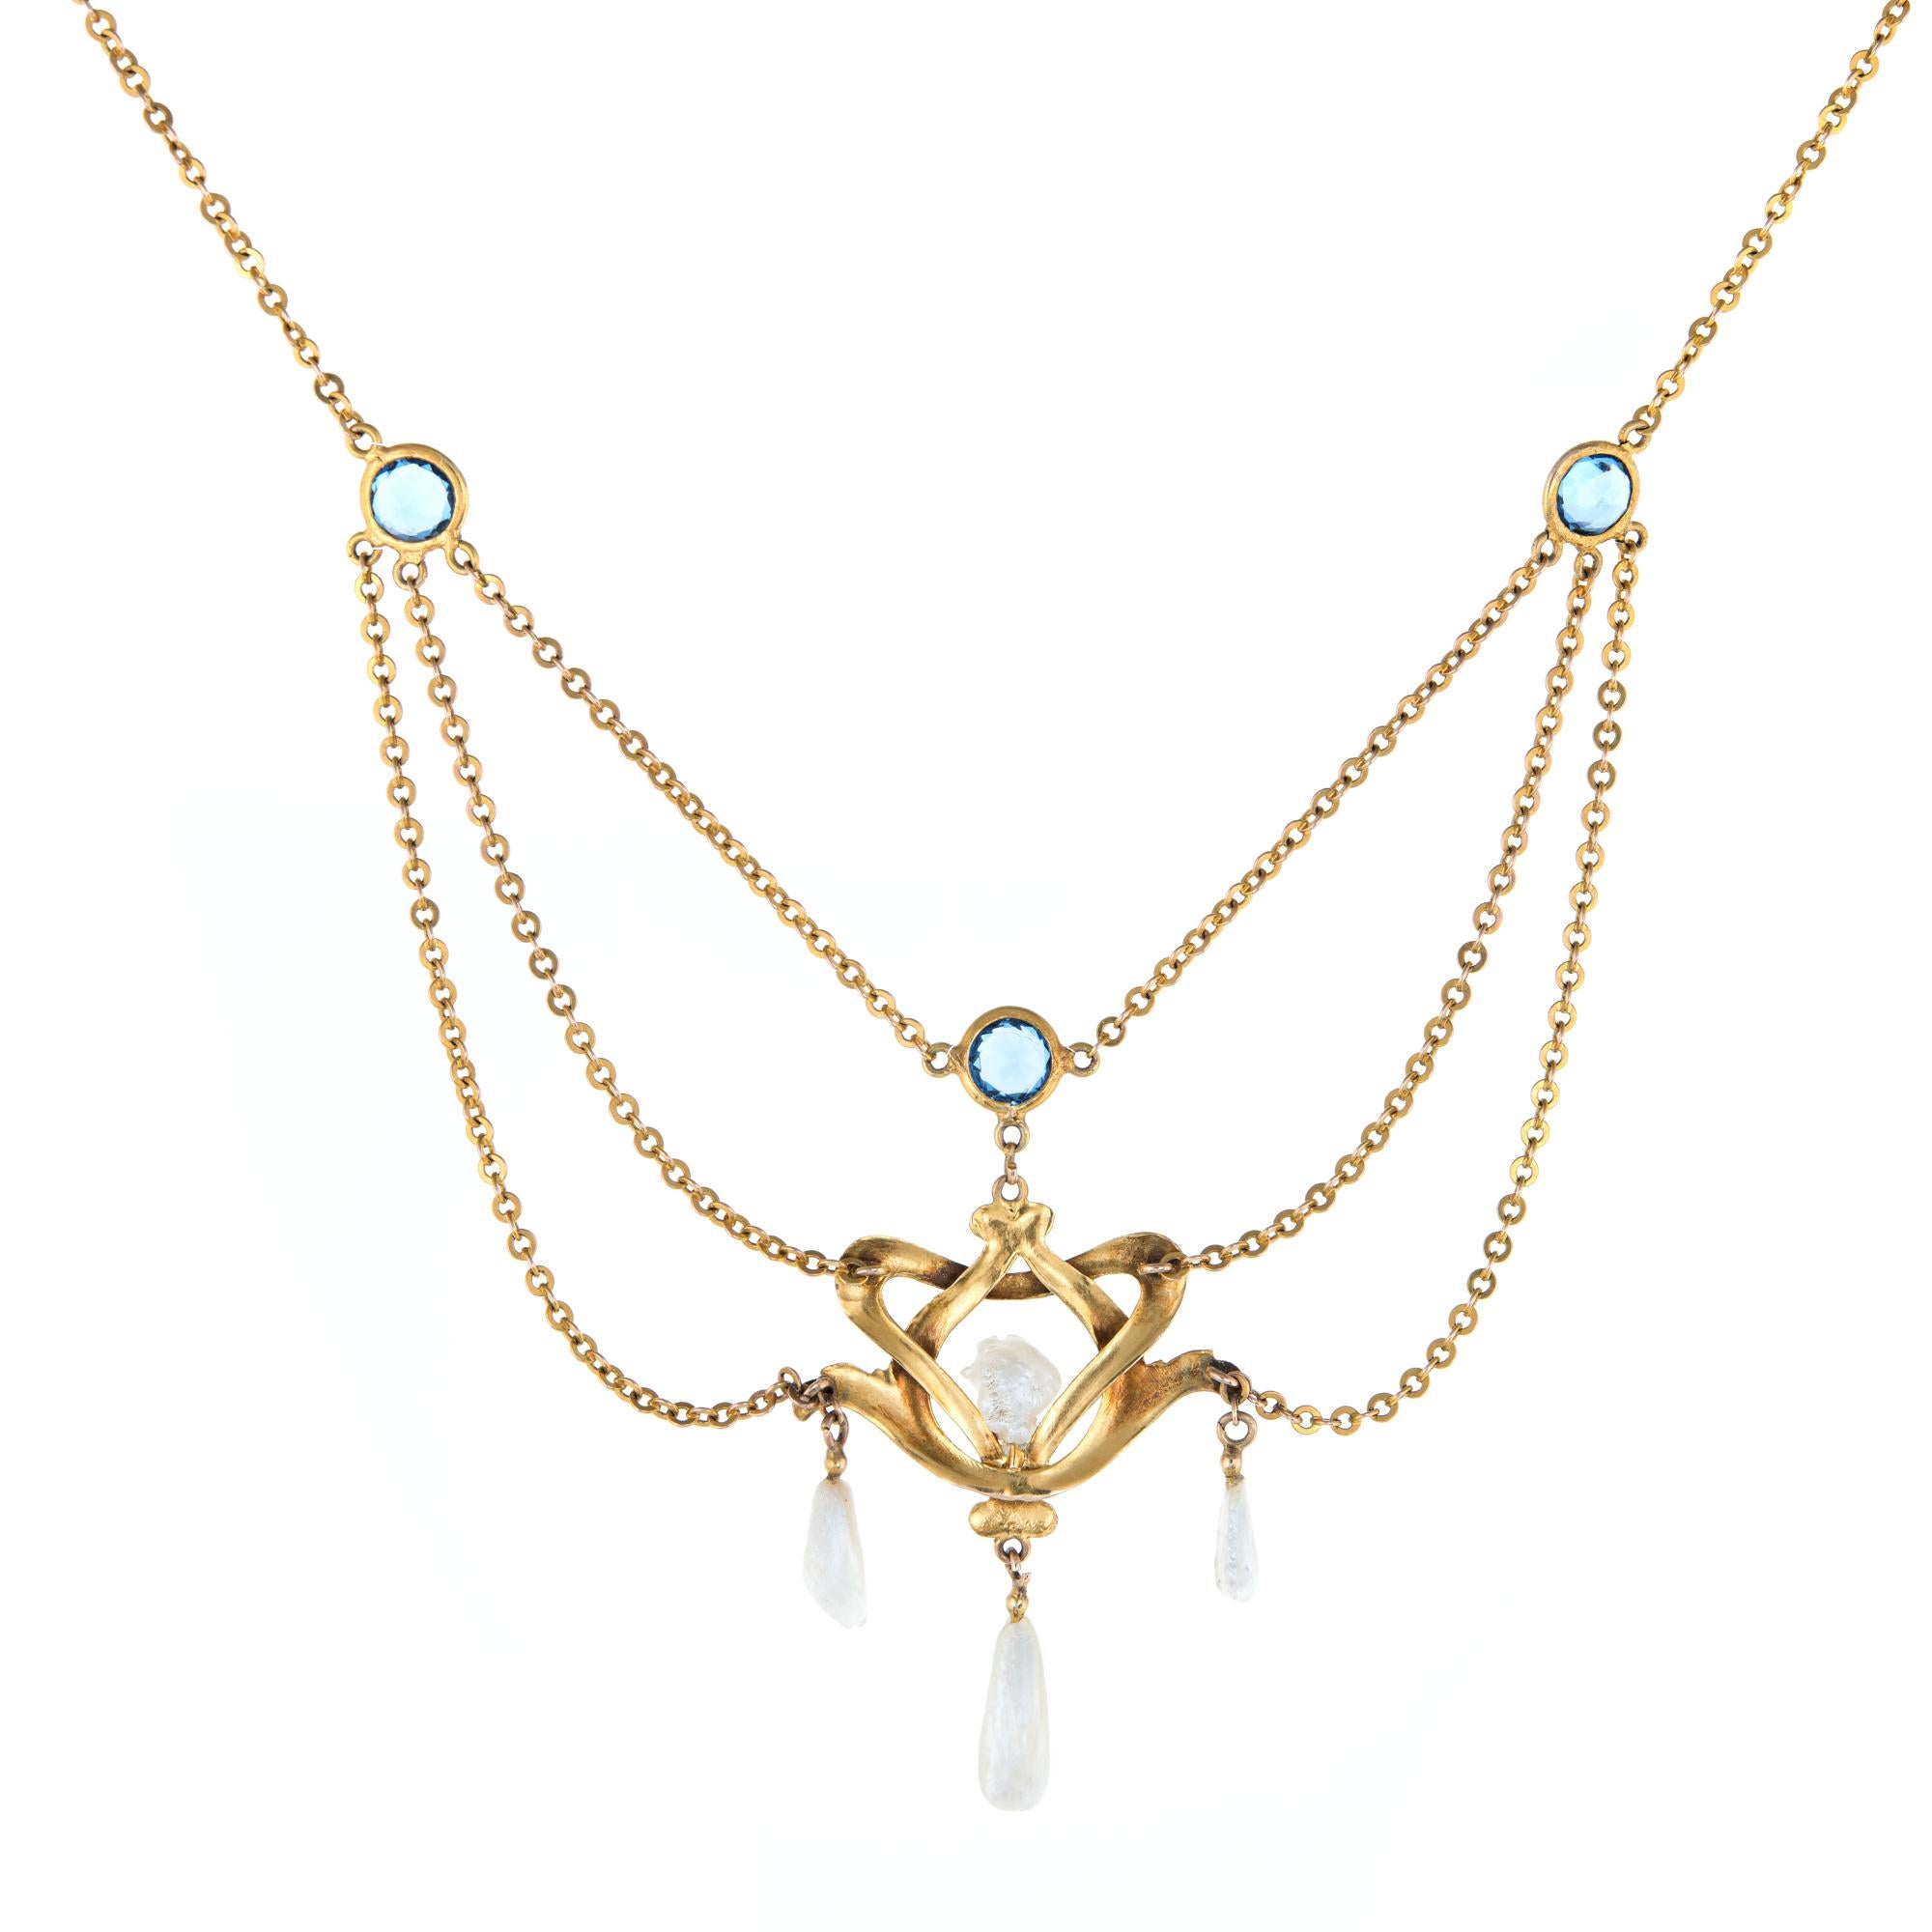 Elegant and finely detailed Art Nouveau era necklace (circa 1900s to 1910s), crafted in 14 karat yellow gold.  

Three blue sapphires measure 5mm each (0.50 carats each - 1.50 carats total estimated weight). Sawtooth pearls range in size from 12mm x